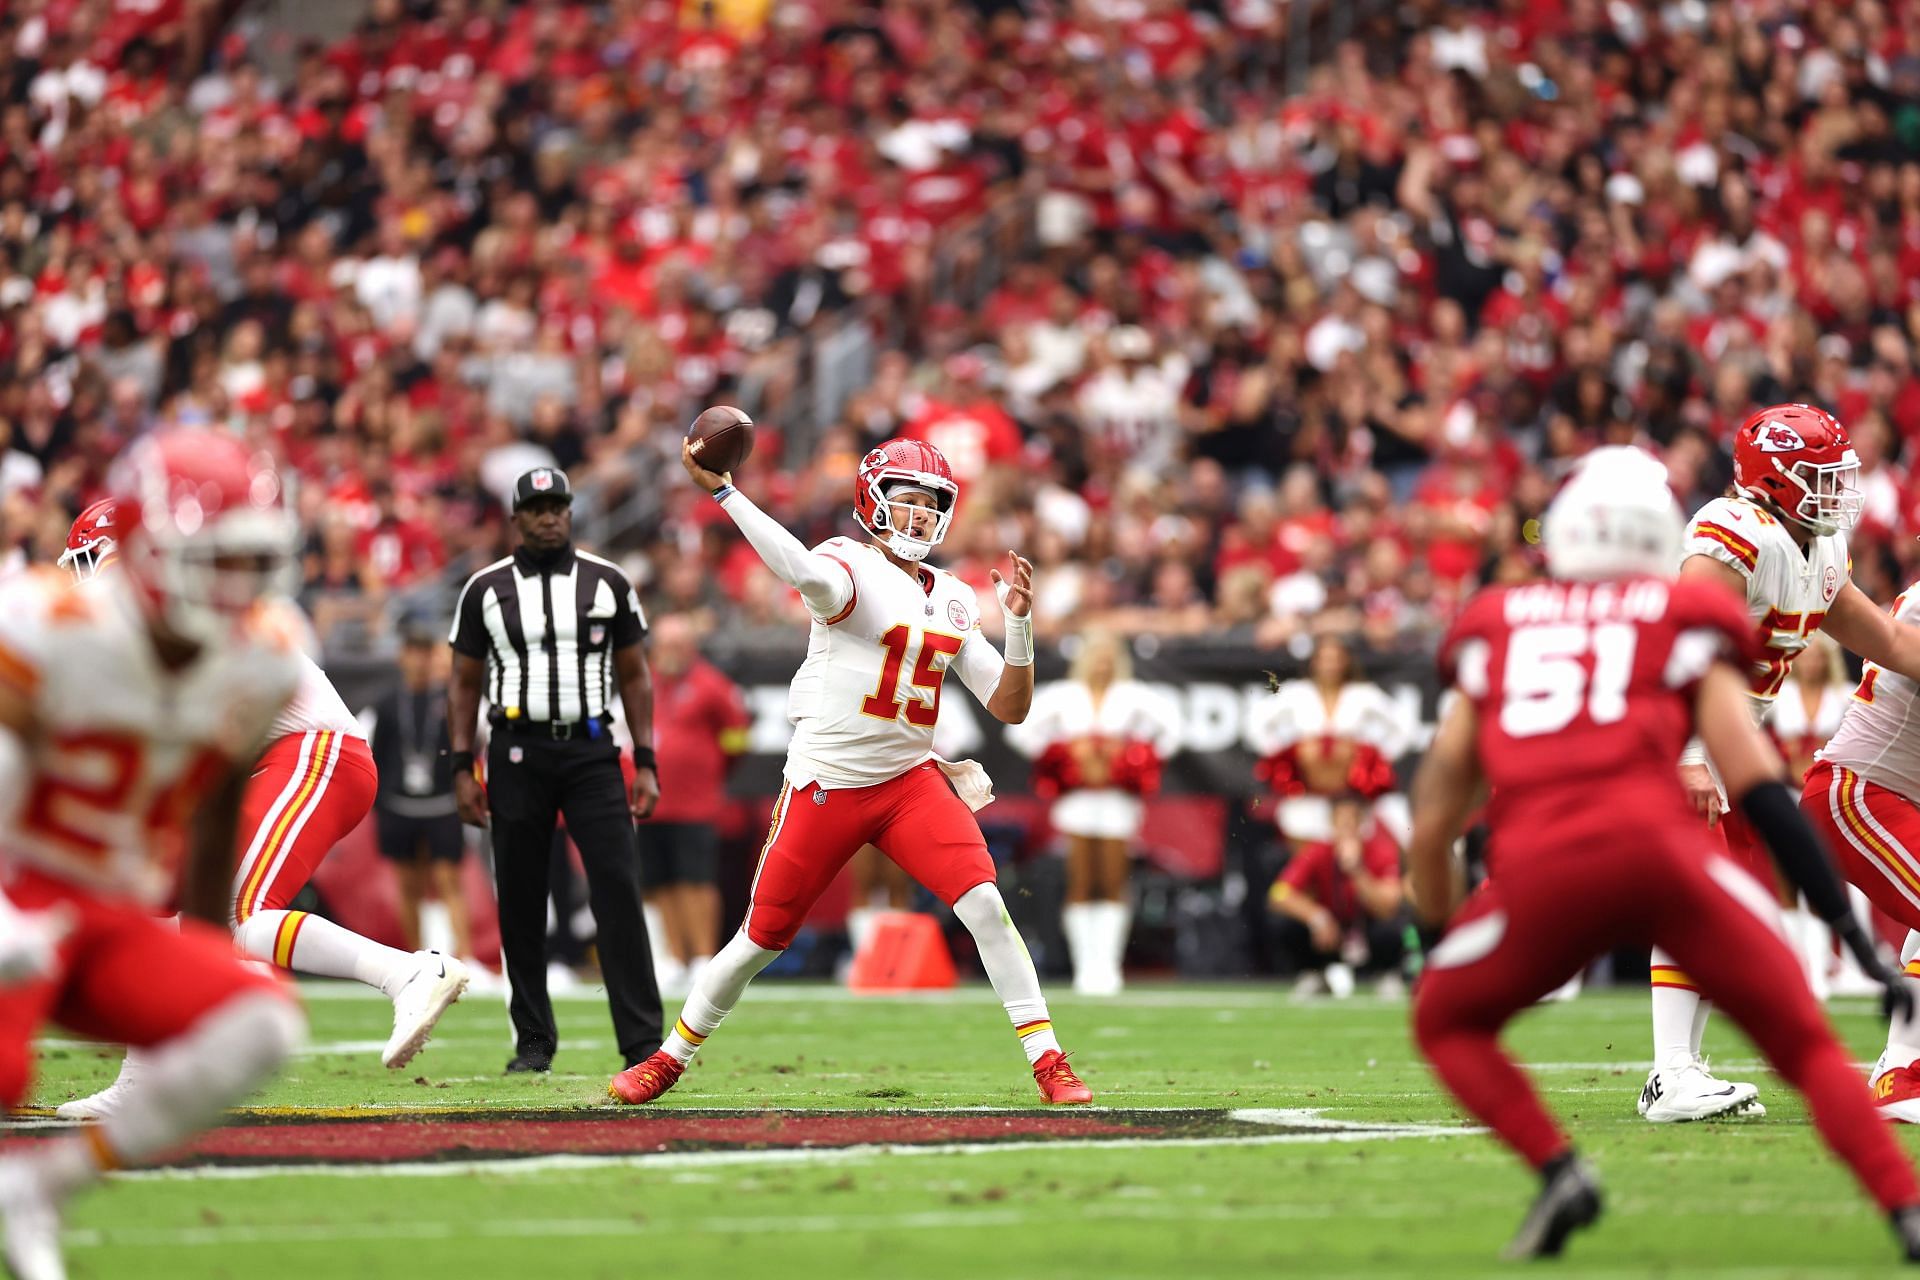 Patrick Mahomes led the Kansas City Chiefs to a massive win over the Arizona Cardinals in their first game of the new NFL season